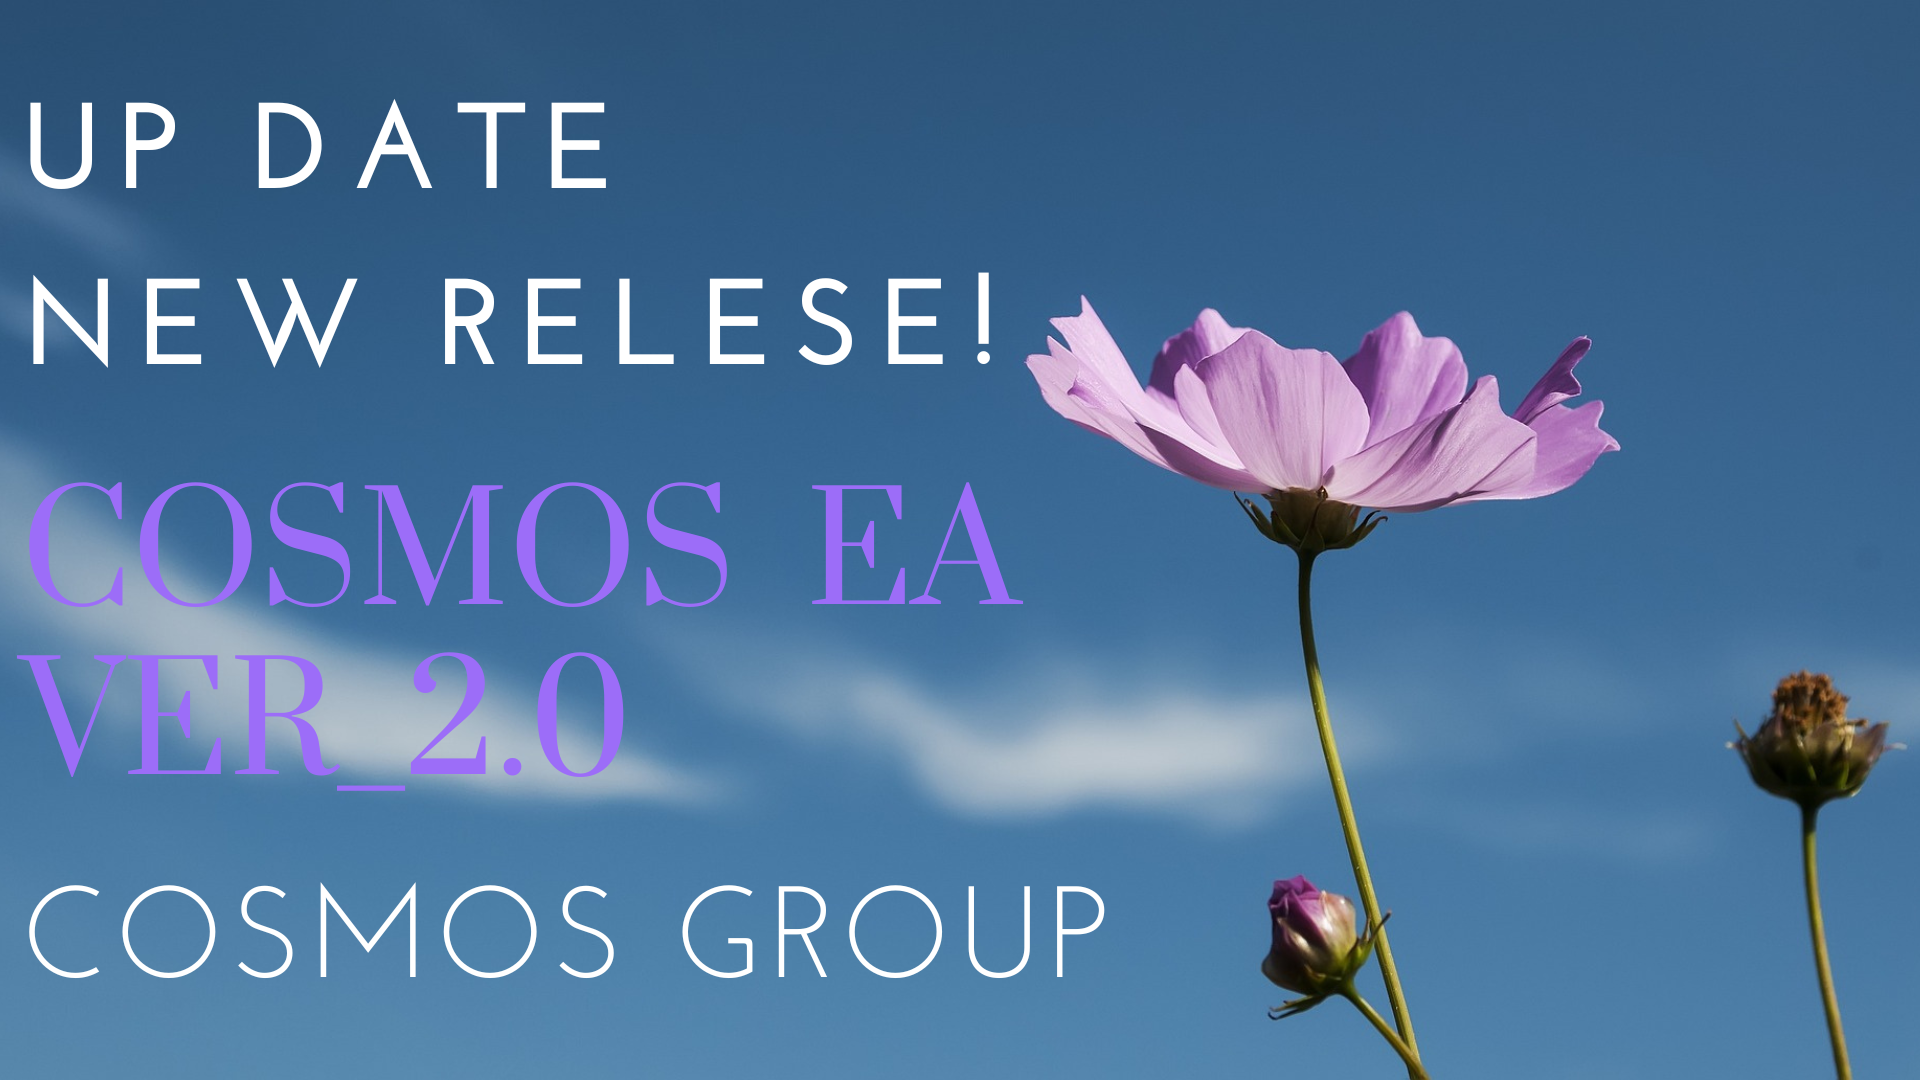 COSMOS GROUP